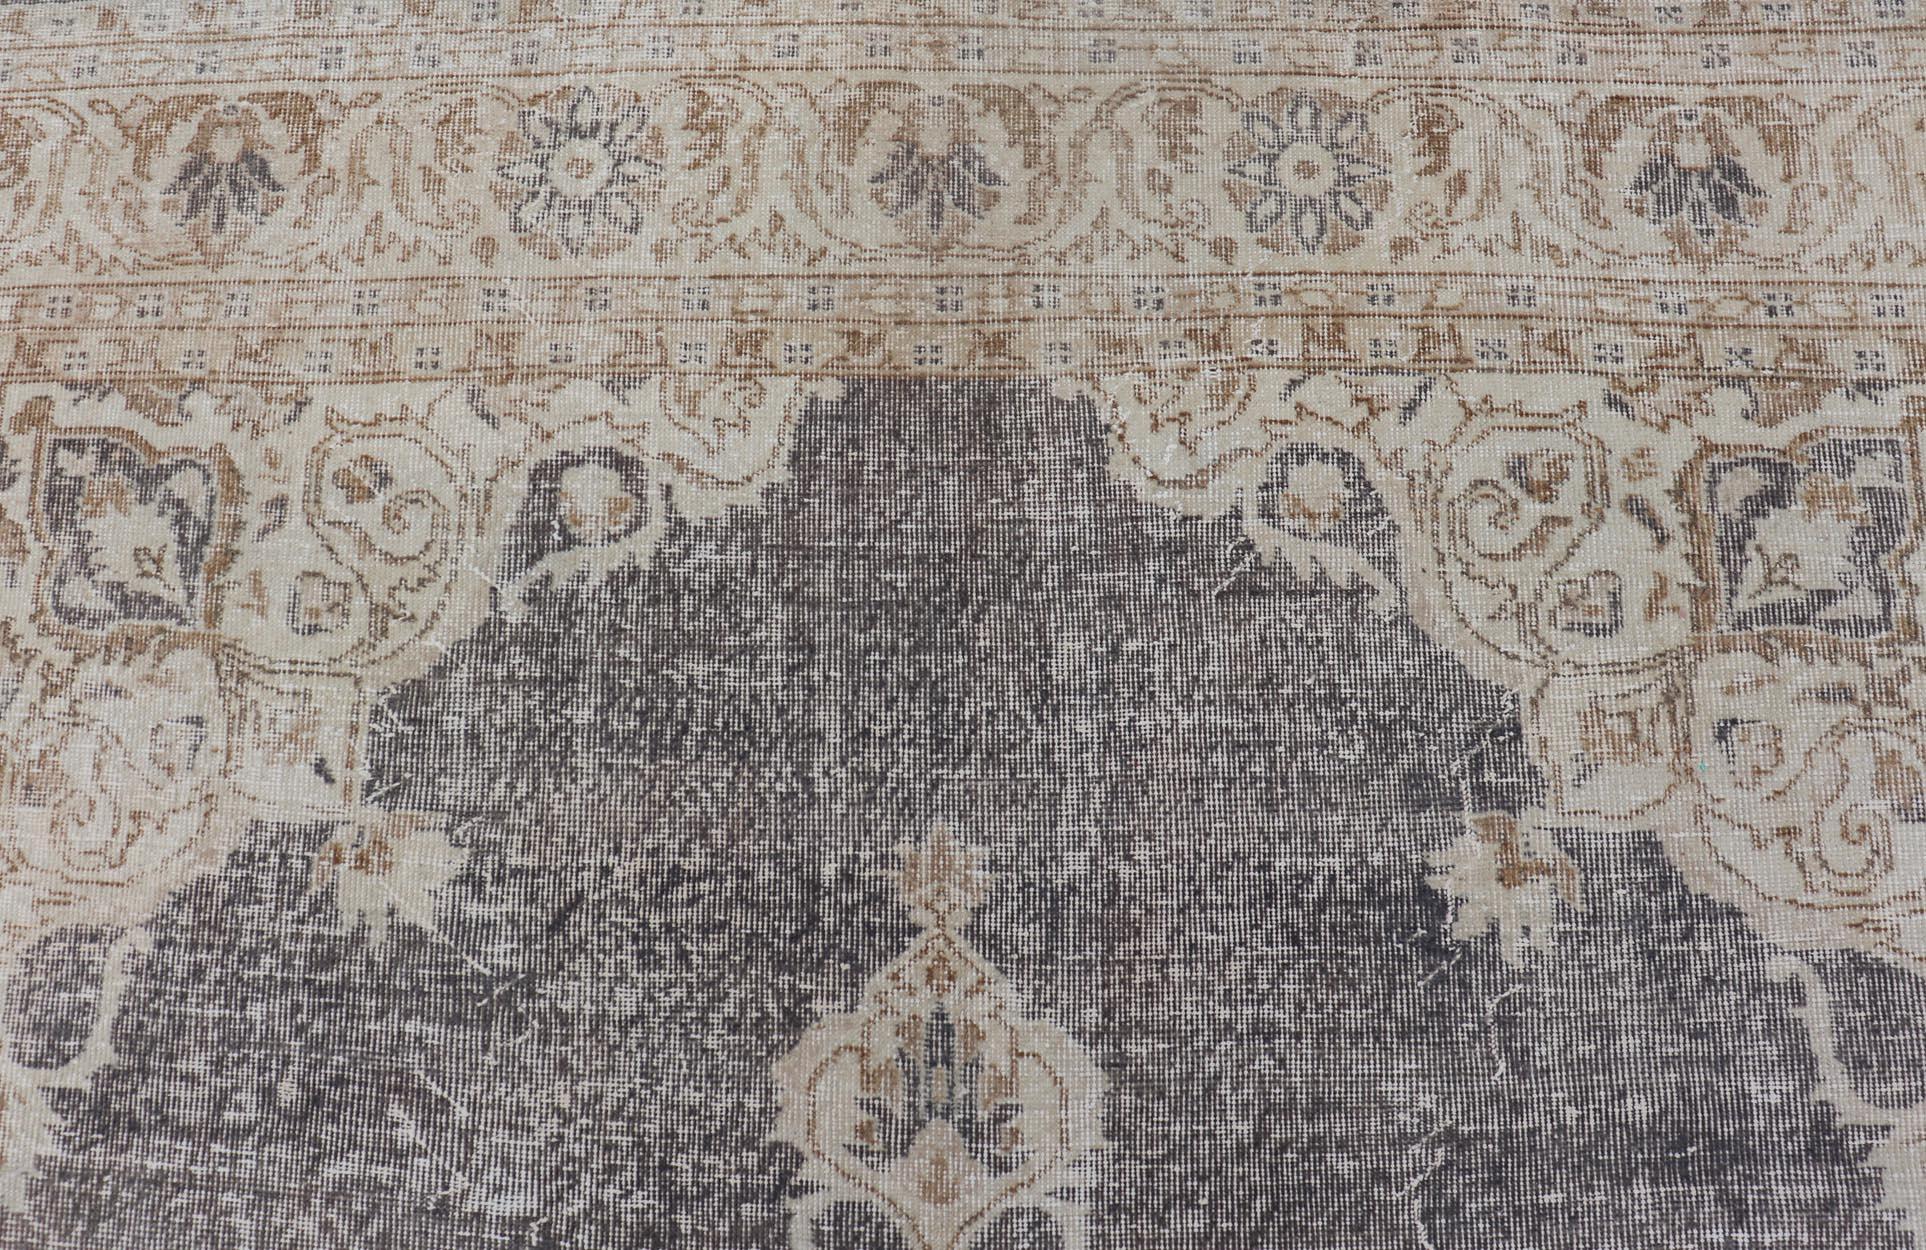 Distressed Turkish Vintage Carpet in Taupe, Dark Gray, brown, Tan and Cream 
Keivan Woven Arts rug/TU-MTU-4972. Turkish distressed rug.

Measures: 7'0 x 10'7 

This vintage Turkish carpet has been neutralized to create faded pigments with a